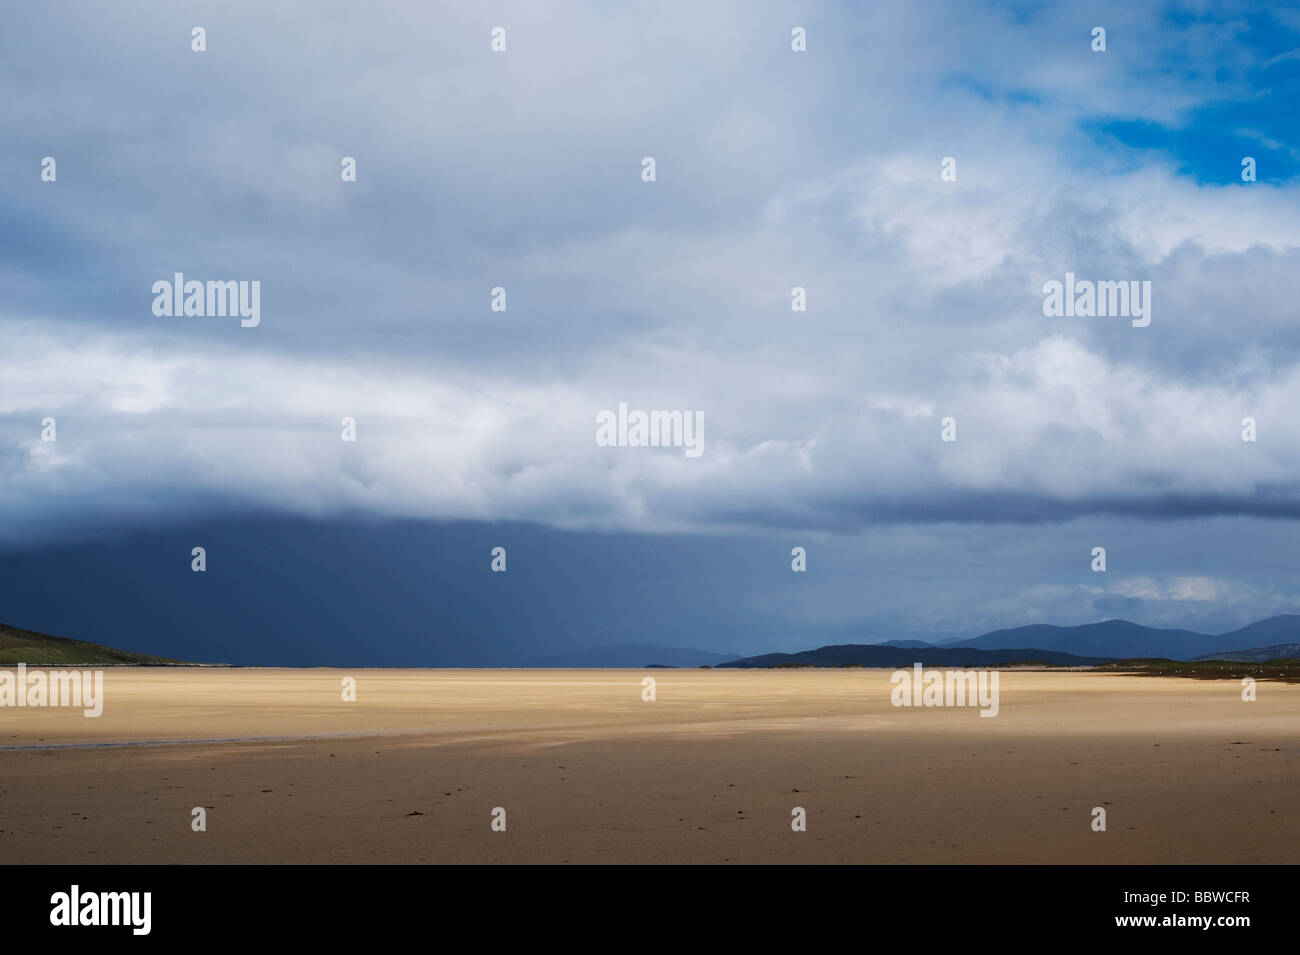 Rain storm and clouds over Traigh Scarista beach, Isle of Harris, Outer hebrides, Scotland Stock Photo